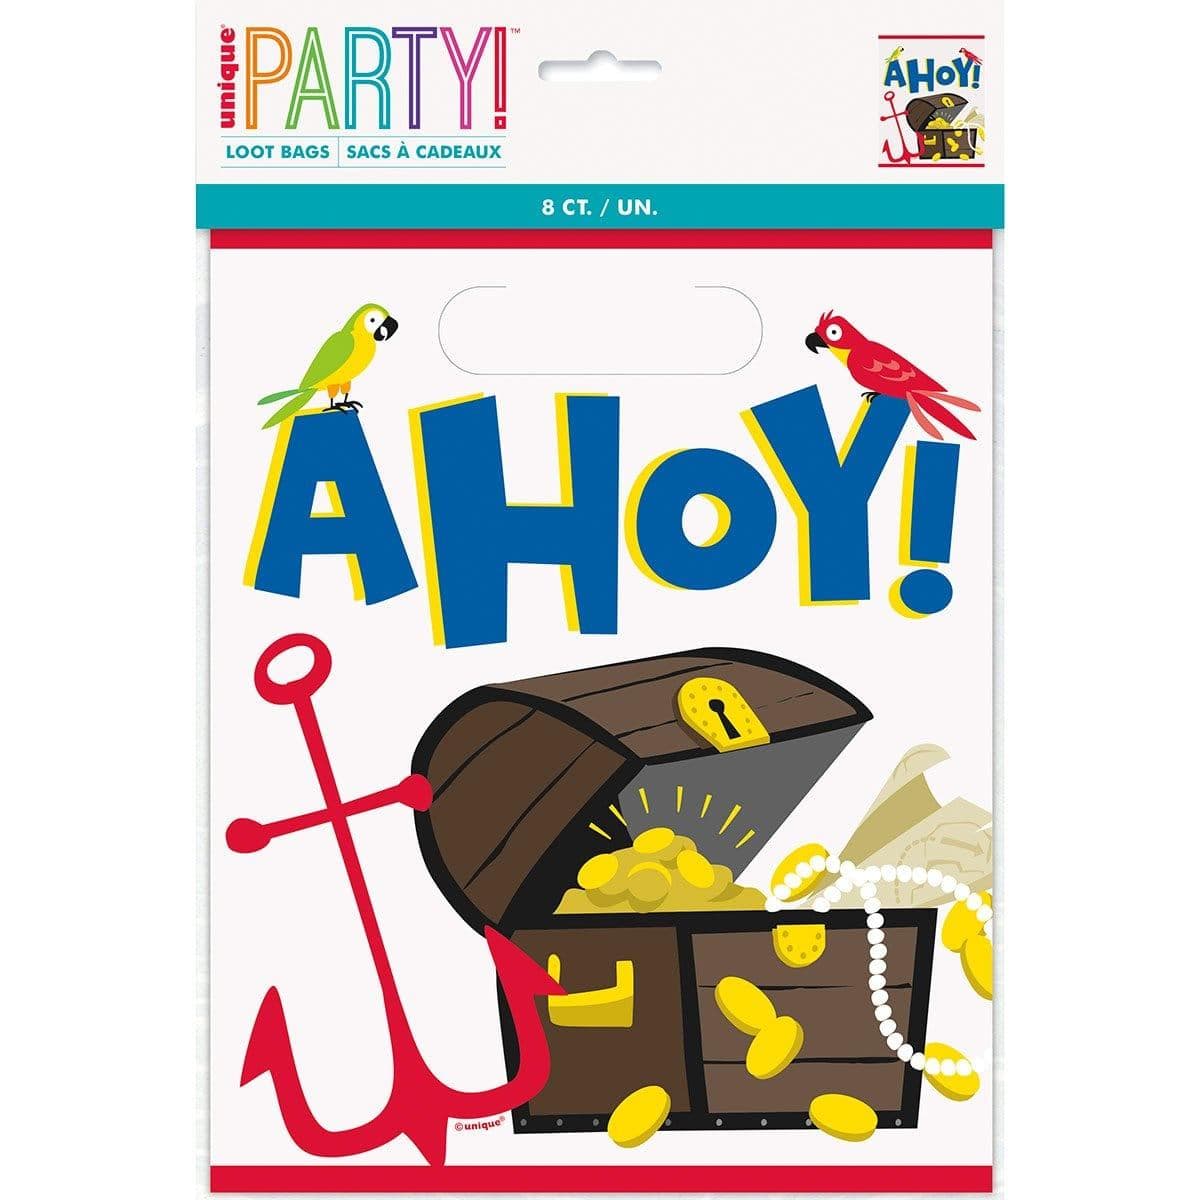 Buy Kids Birthday Ahoy Pirate Loot Bags, 8 Count sold at Party Expert